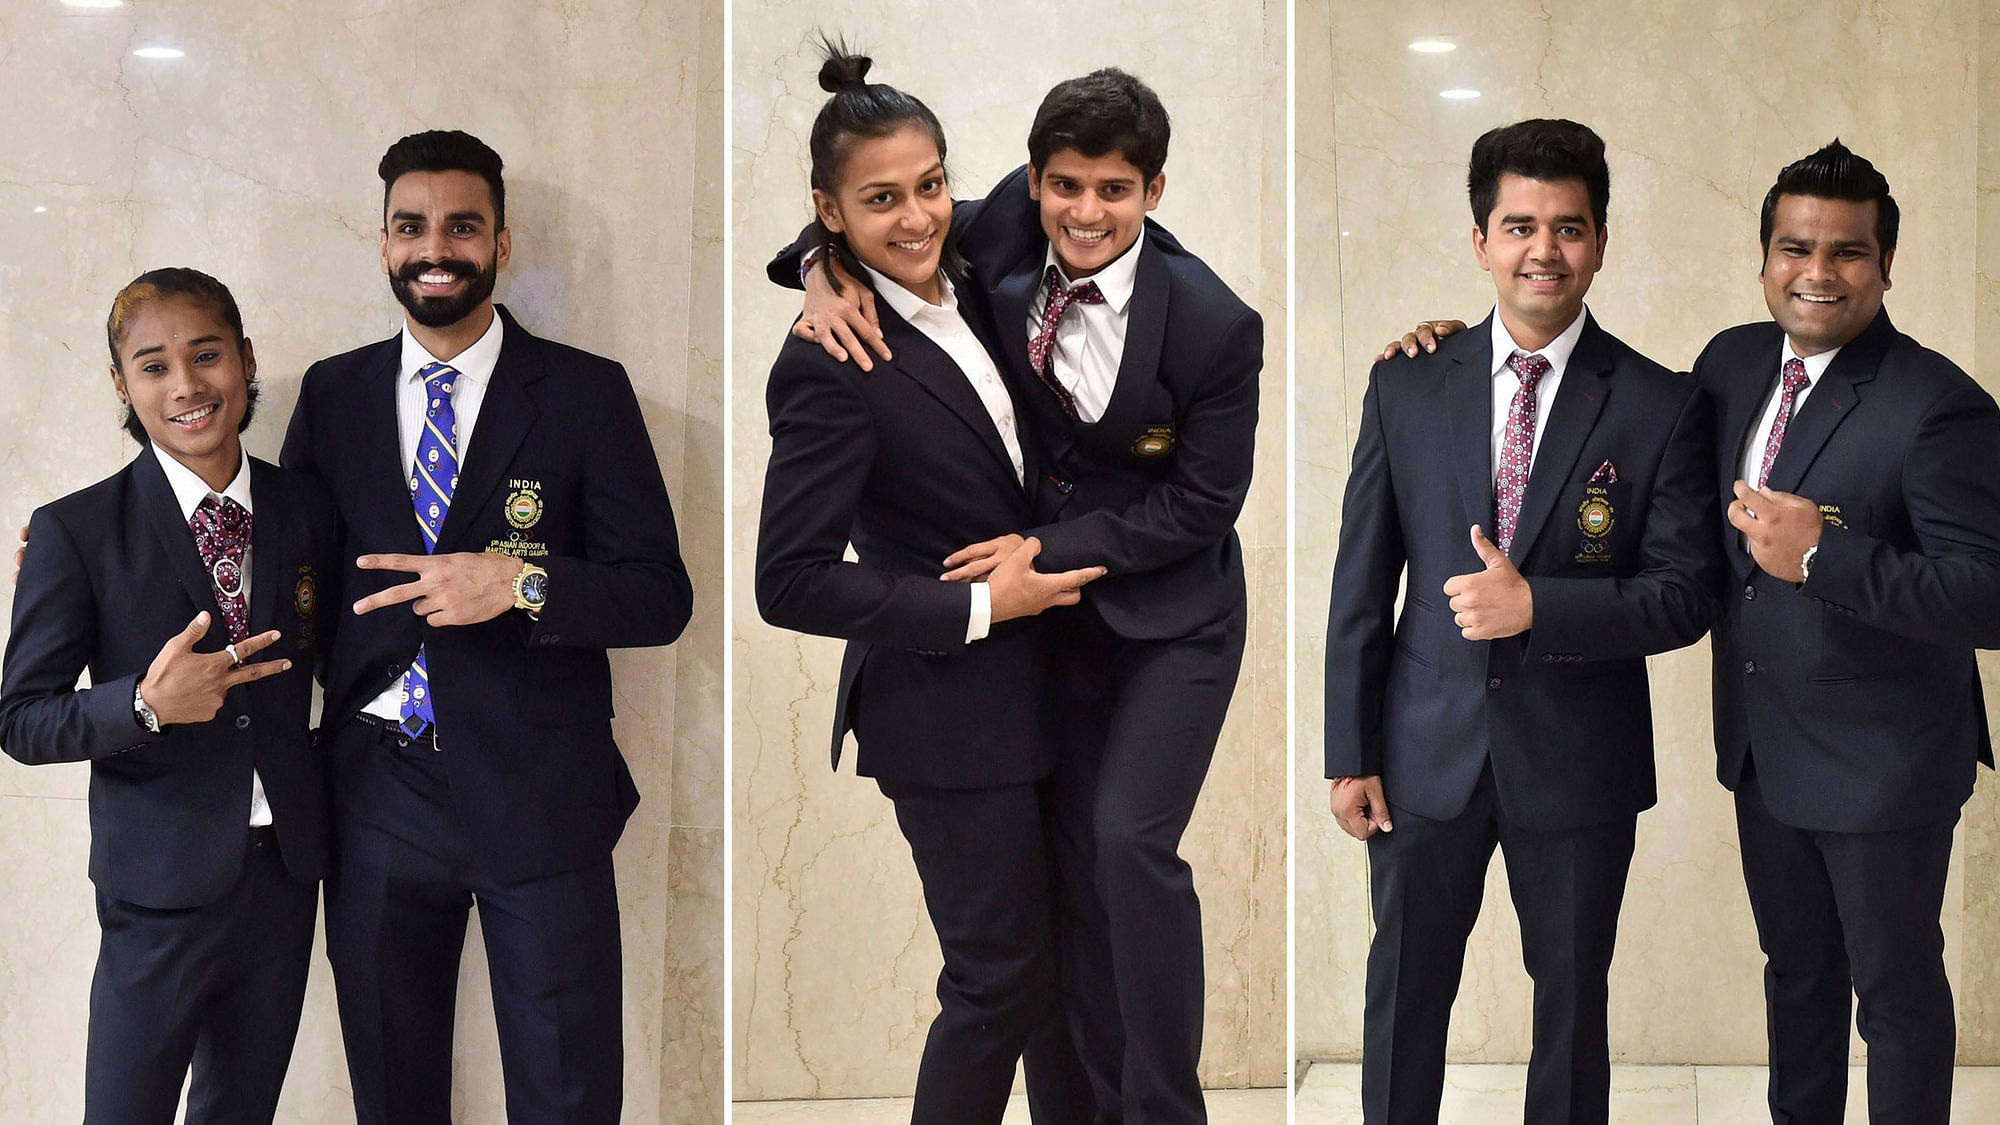 Hima Das, Arpinder Singh, Pincky Balhara, Malaprabha Jadhav, Aman Saini and Rajat Chauhan pose for a photograph ahead of the Asian games felicitation ceremony in New Delhi on Tuesday.